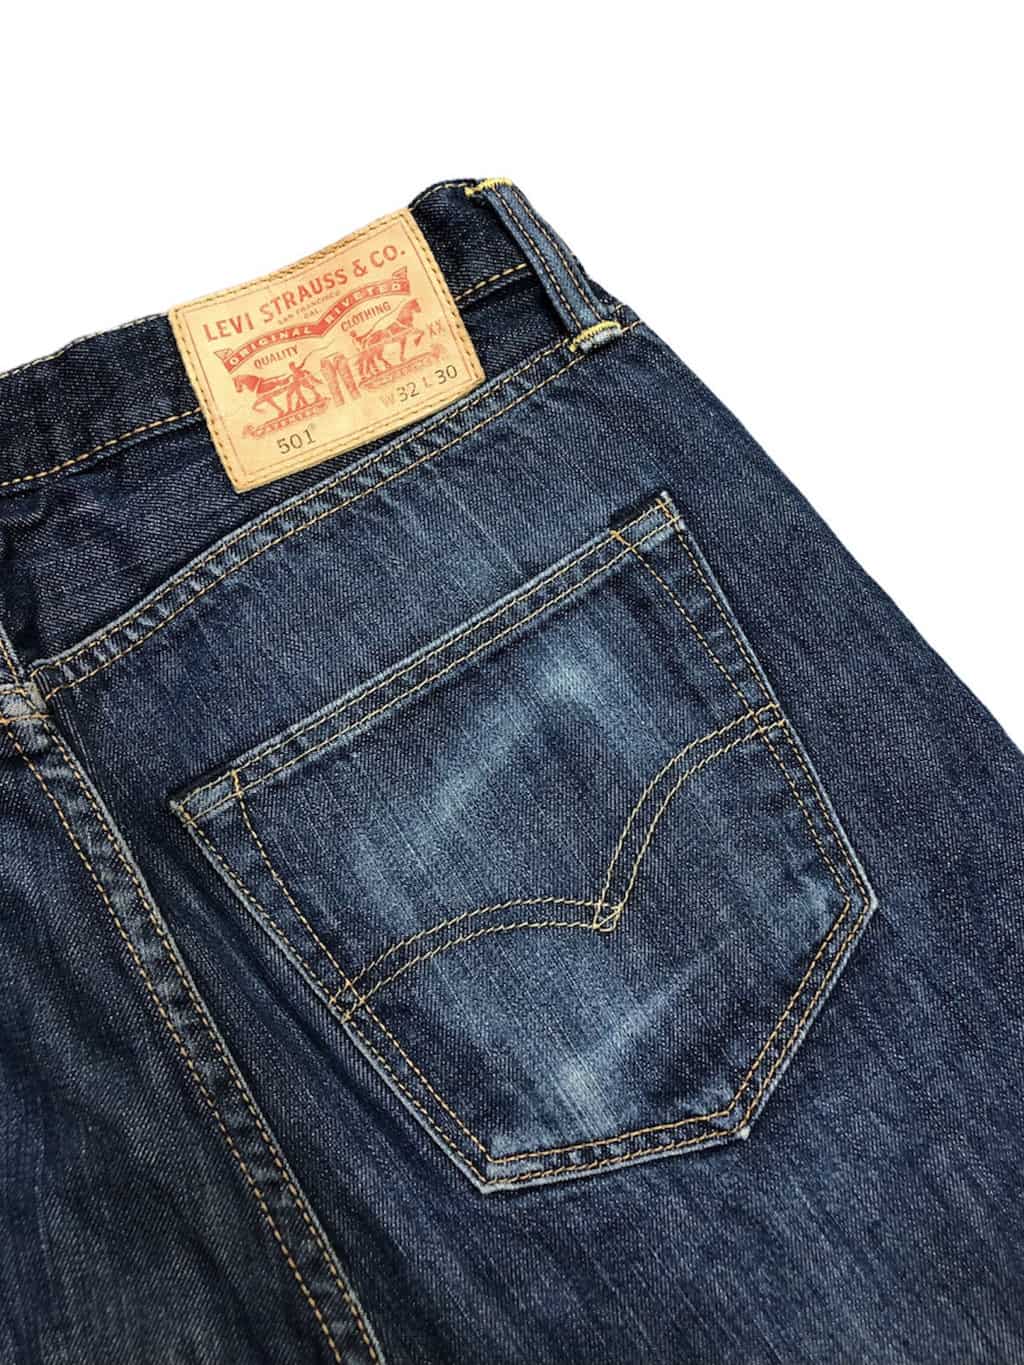 Levis 501 jeans in dark blue denim with whiskered hips and leather patch -  W31 x  - St Cyr Vintage